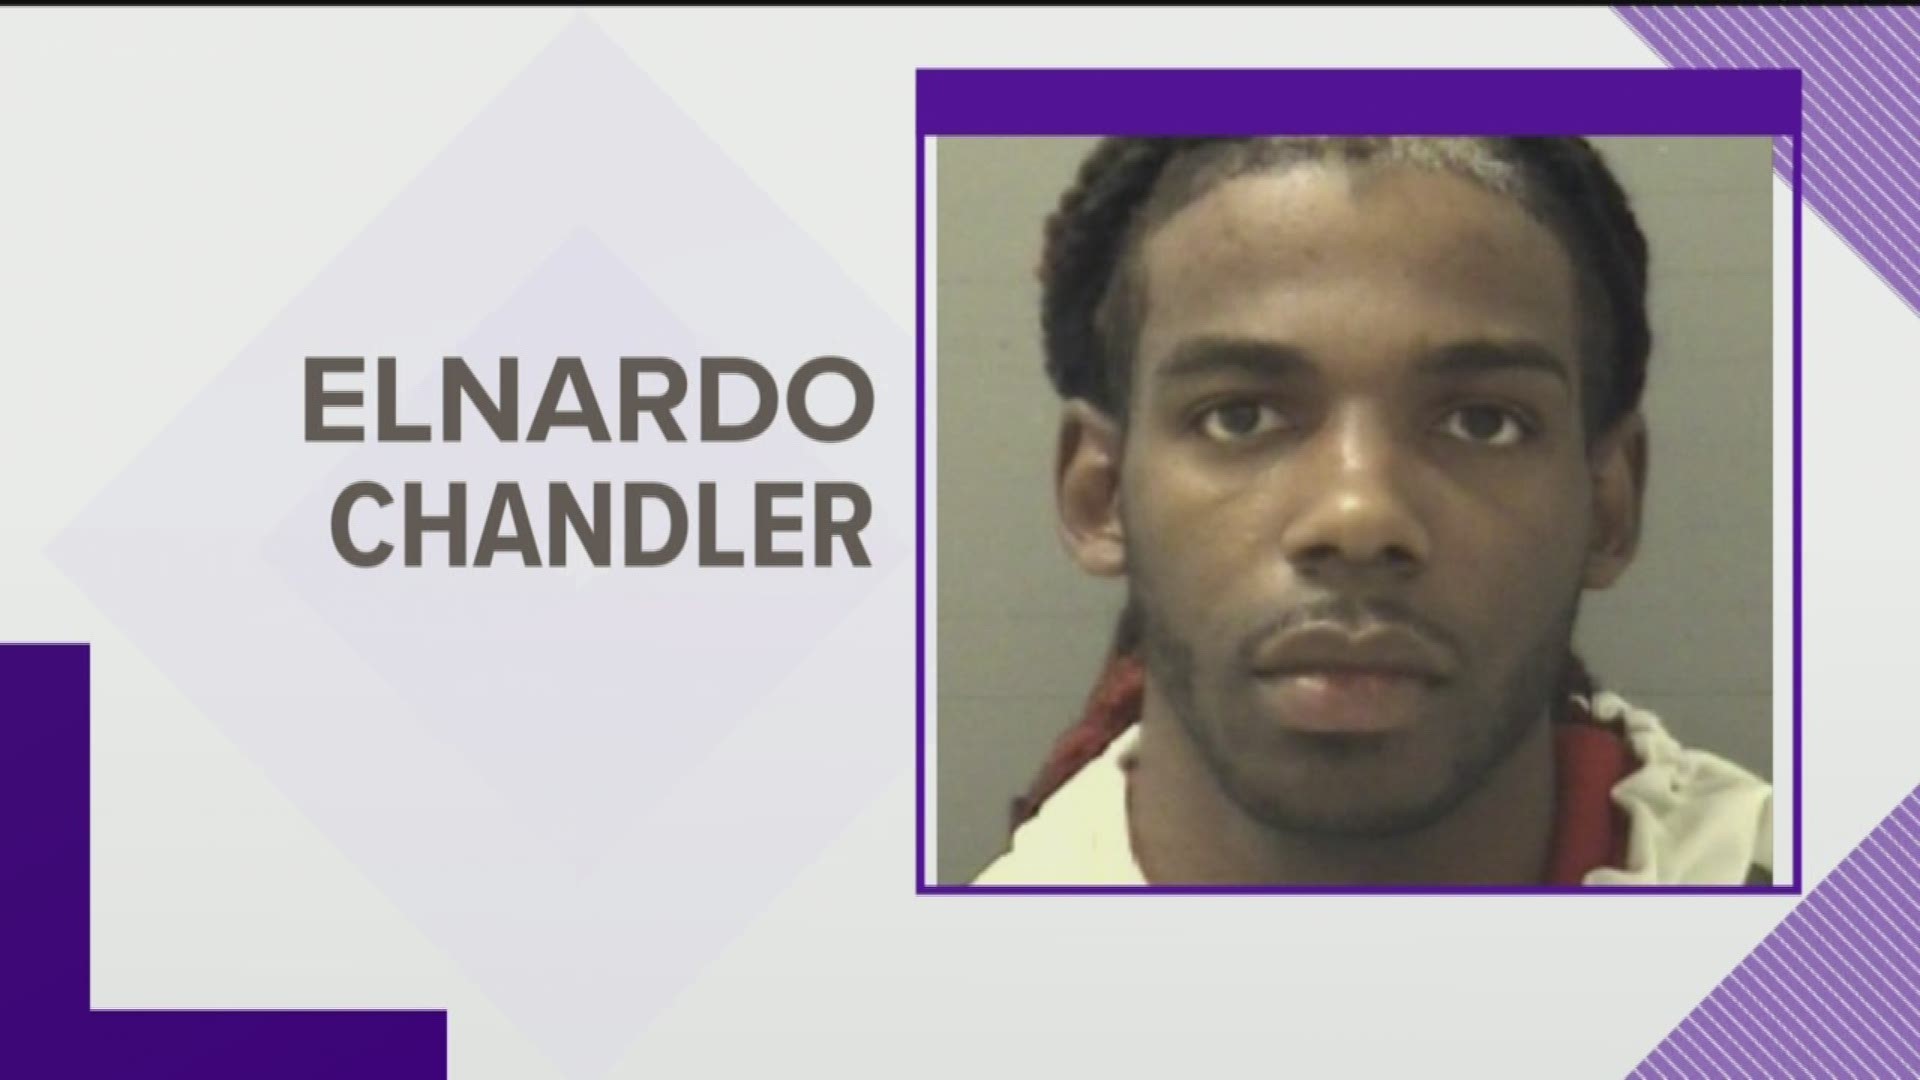 Smyrna Police Department secured a fugitive warrant for Chandler which will start the extradition process for Chandler to go back to New Jersey.